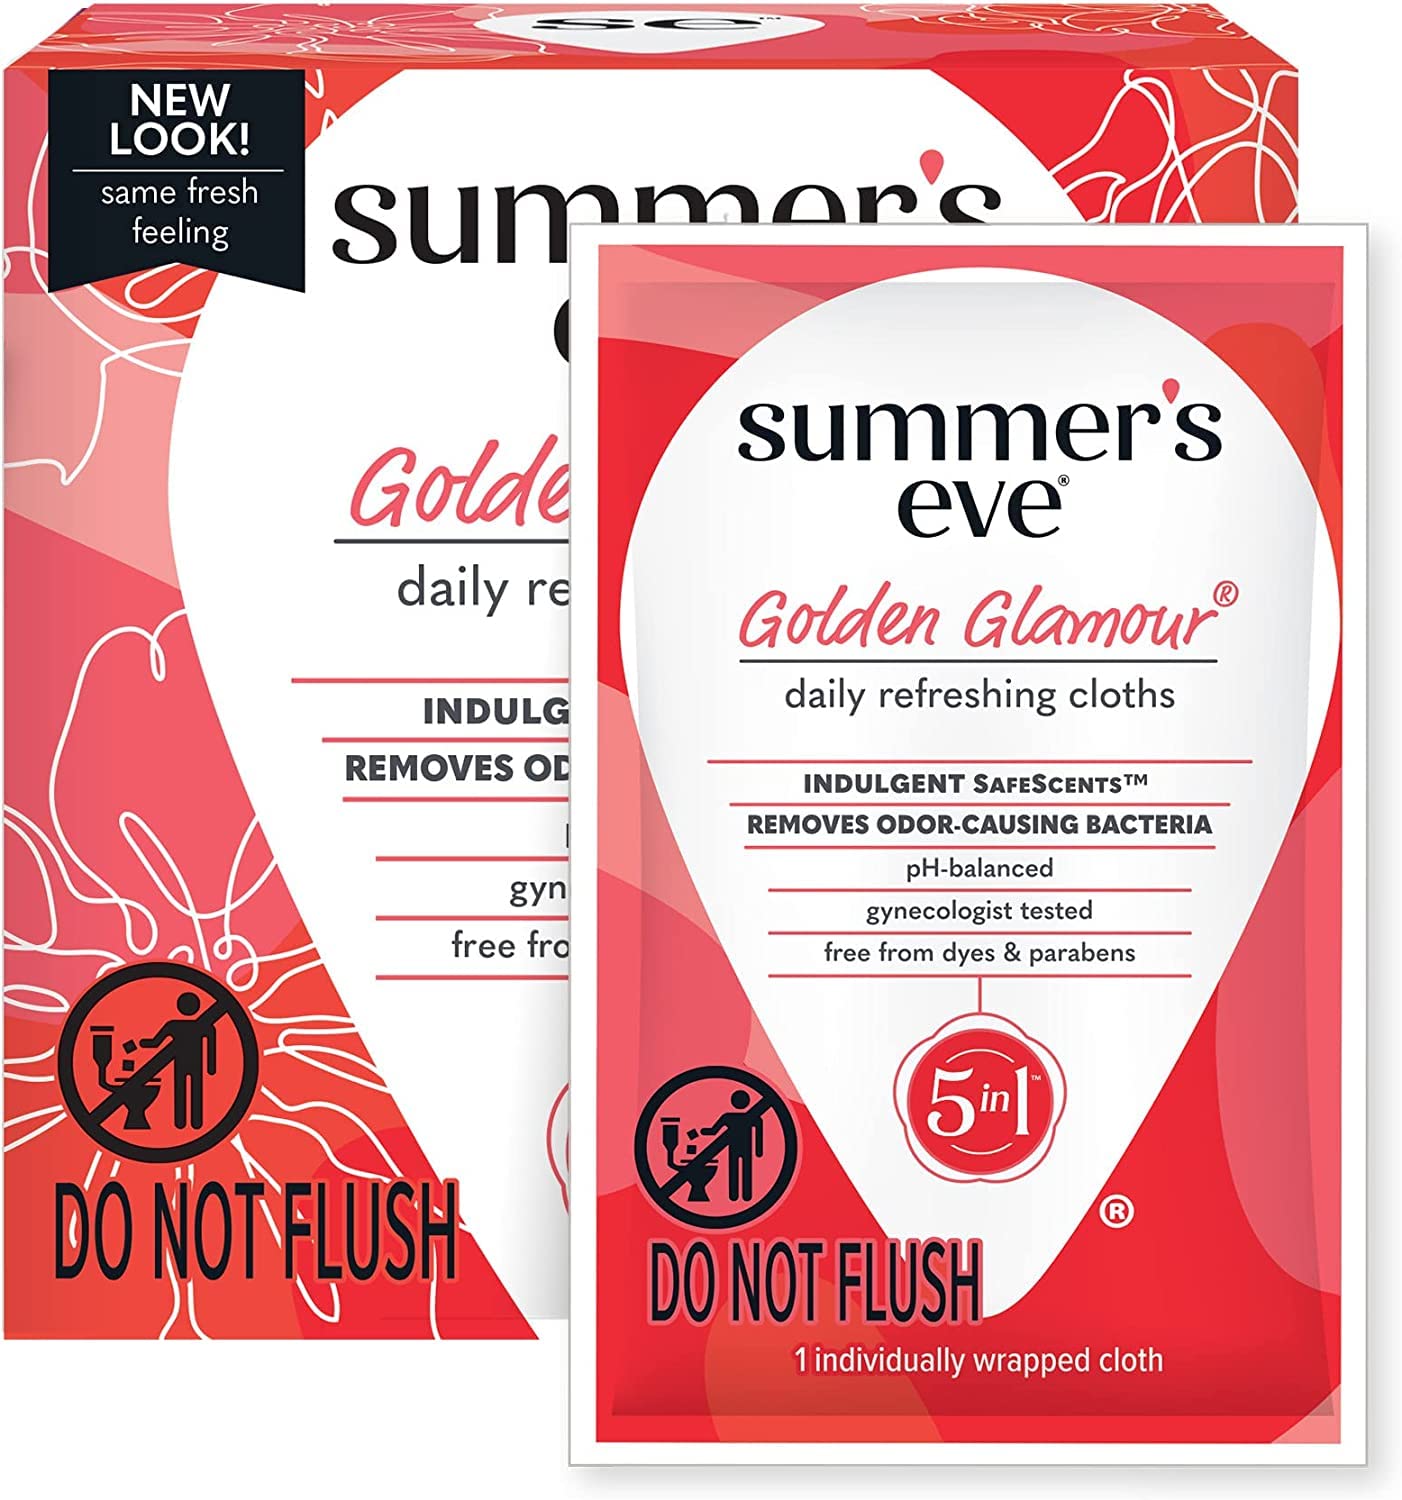 Summer's Eve Golden Glamour Daily Refreshing Feminine Wipes, Removes Odor, pH balanced, 16 Count (Pack of 6)